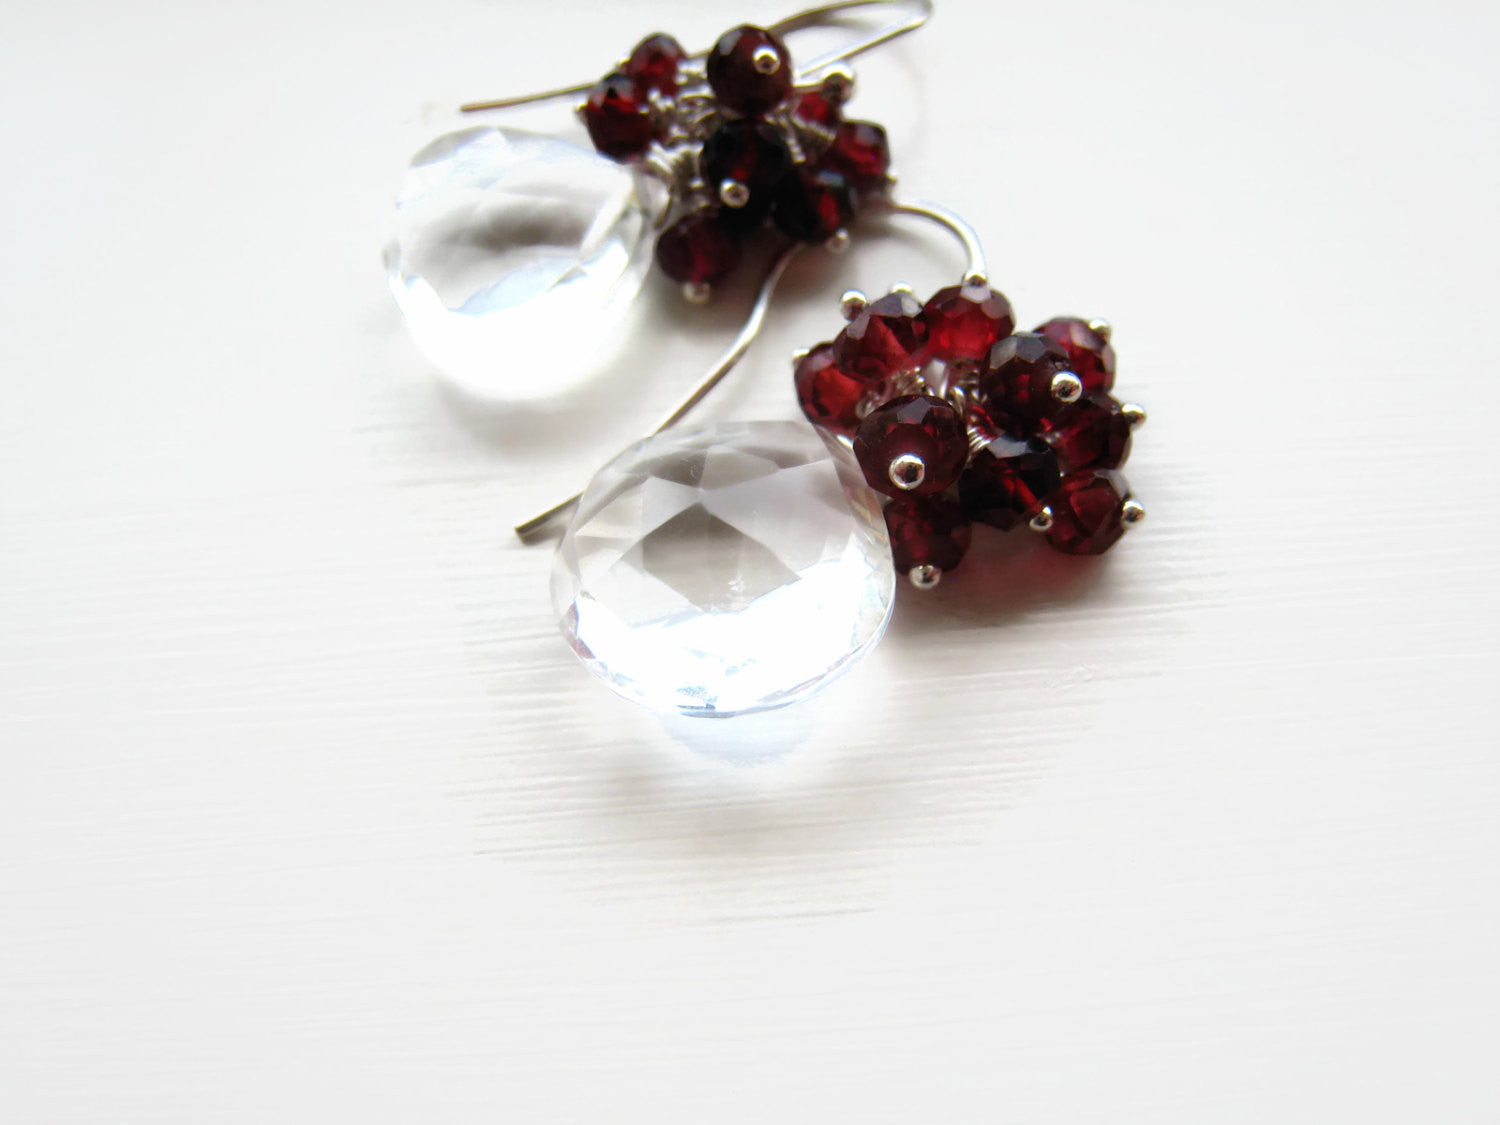 Rock Crystal Quartz Cluster Earrings with Red Garnets - Sienna Grace Jewelry | Pretty Little Handcrafted Sparkles